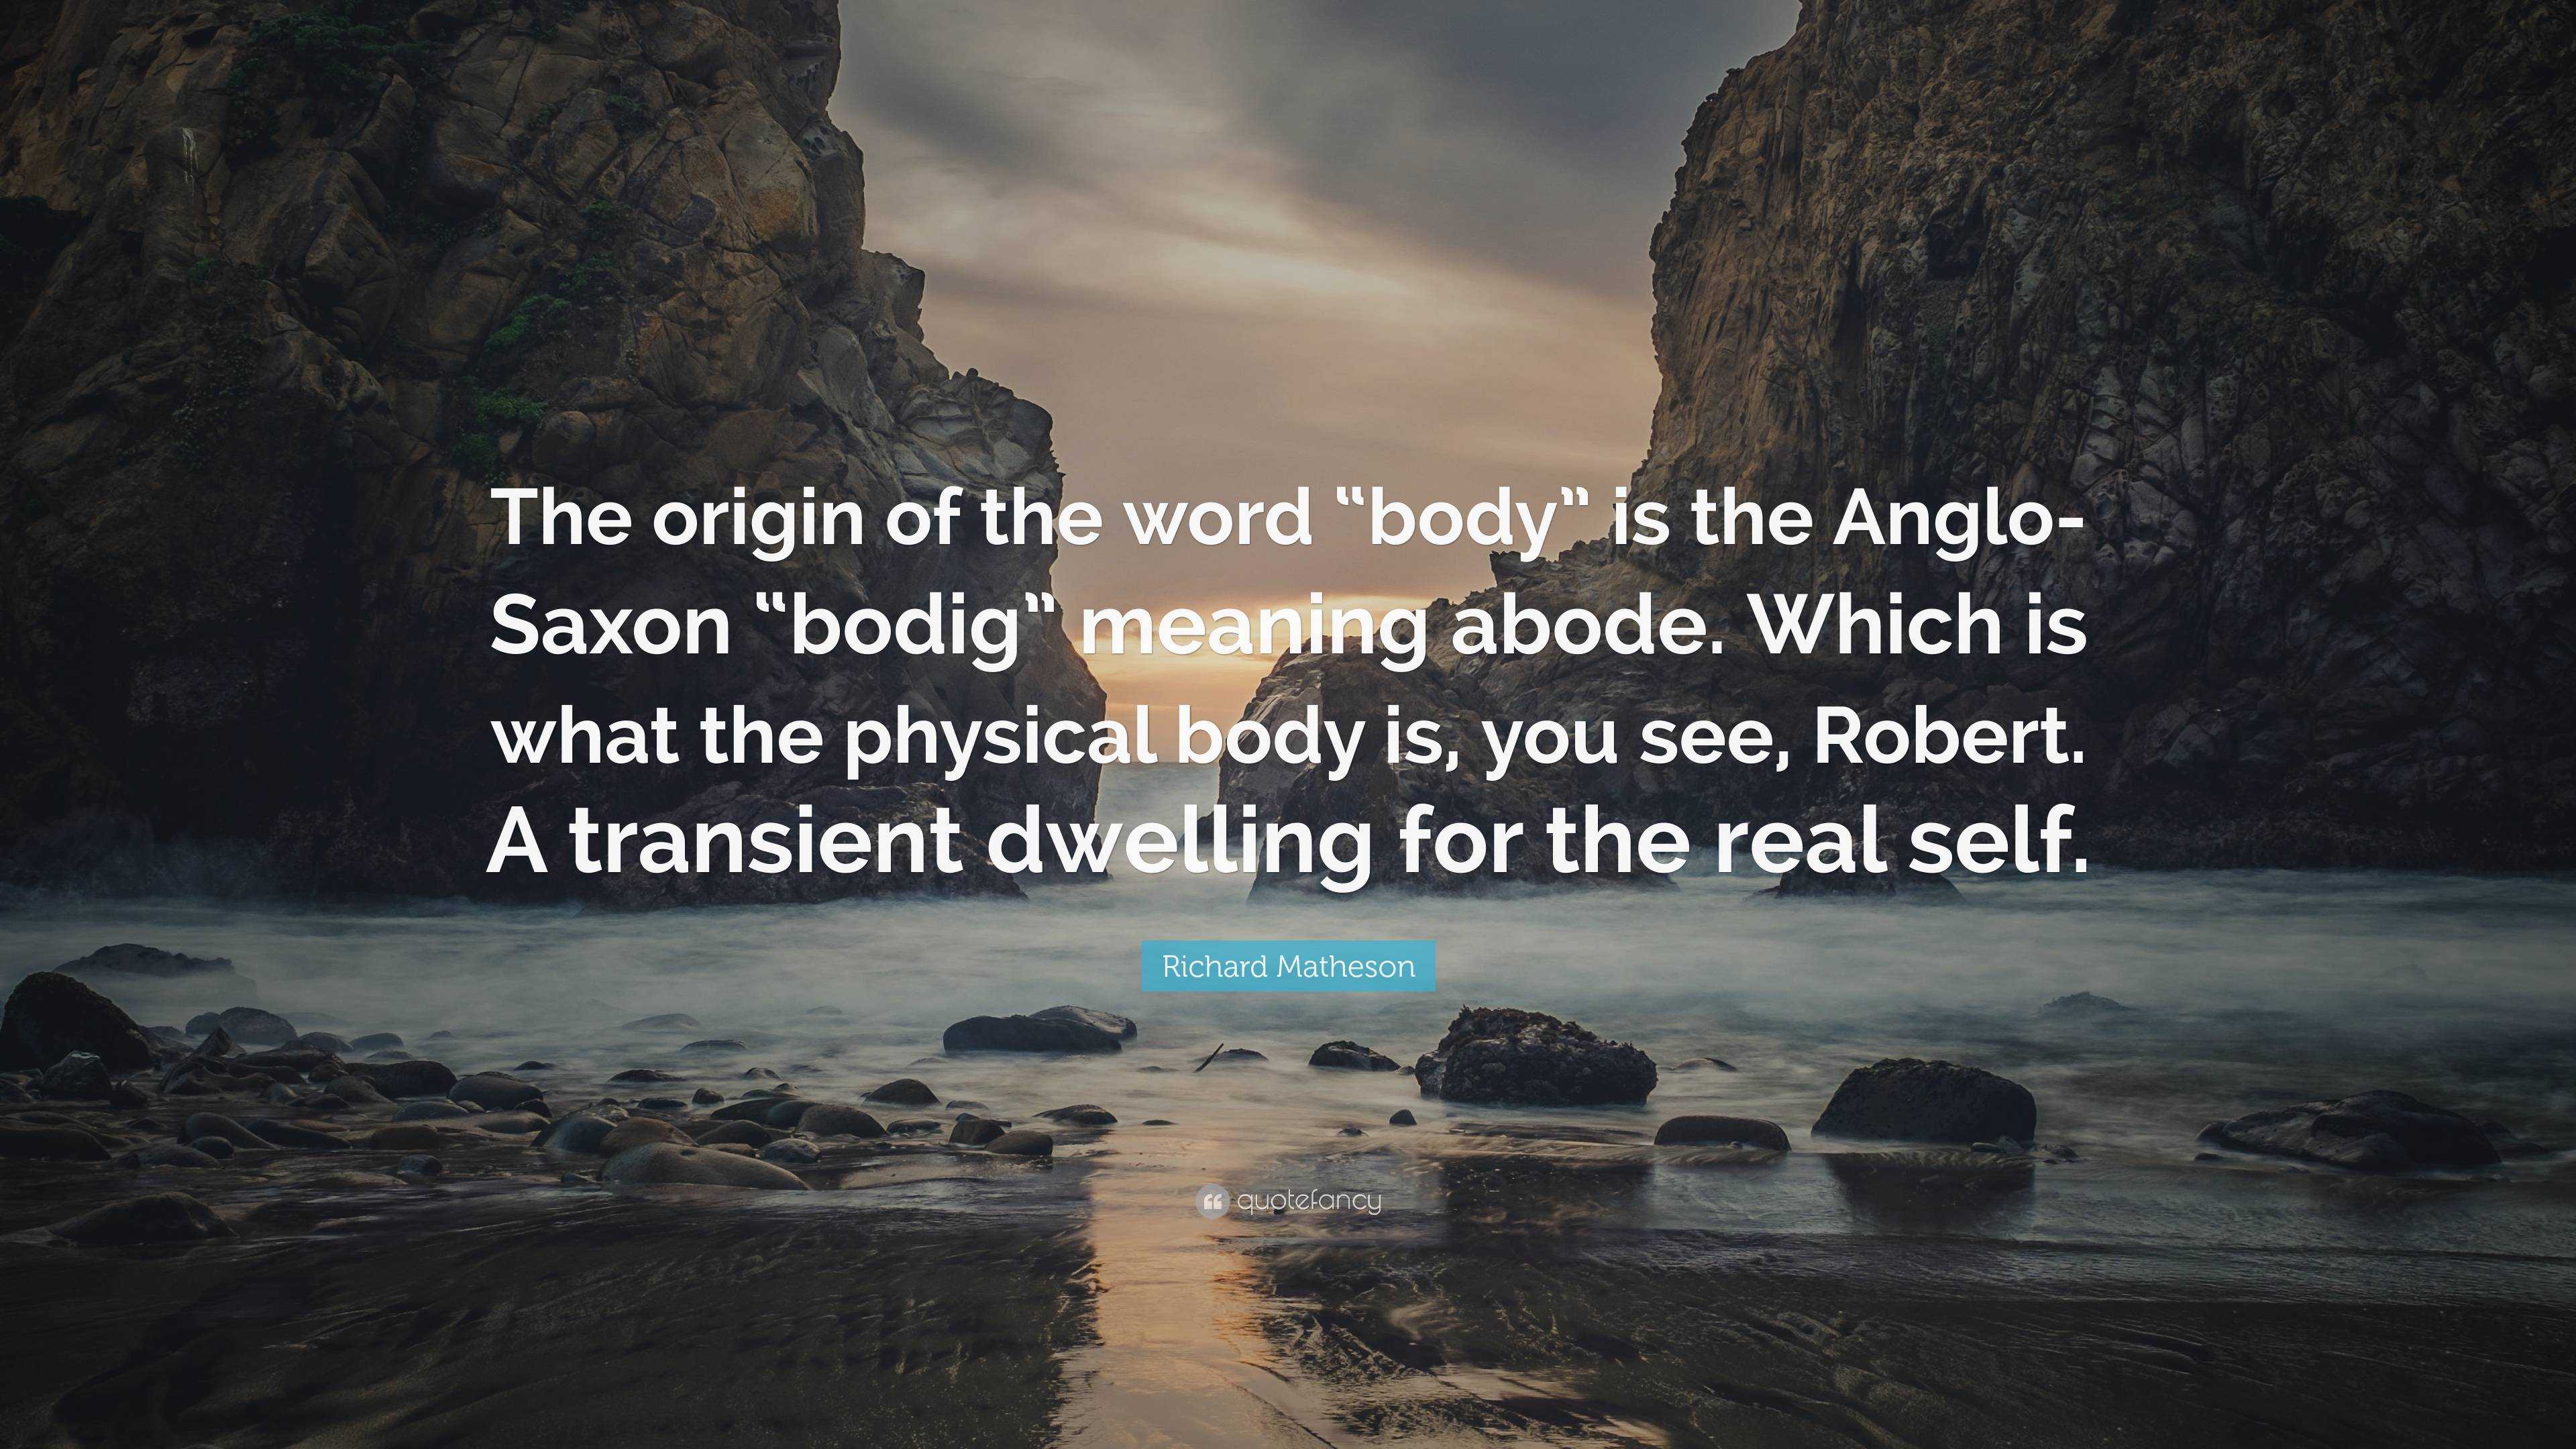 Richard Matheson Quote The Origin Of The Word Body Is The Anglo Saxon Bodig Meaning Abode Which Is What The Physical Body Is You See Rob